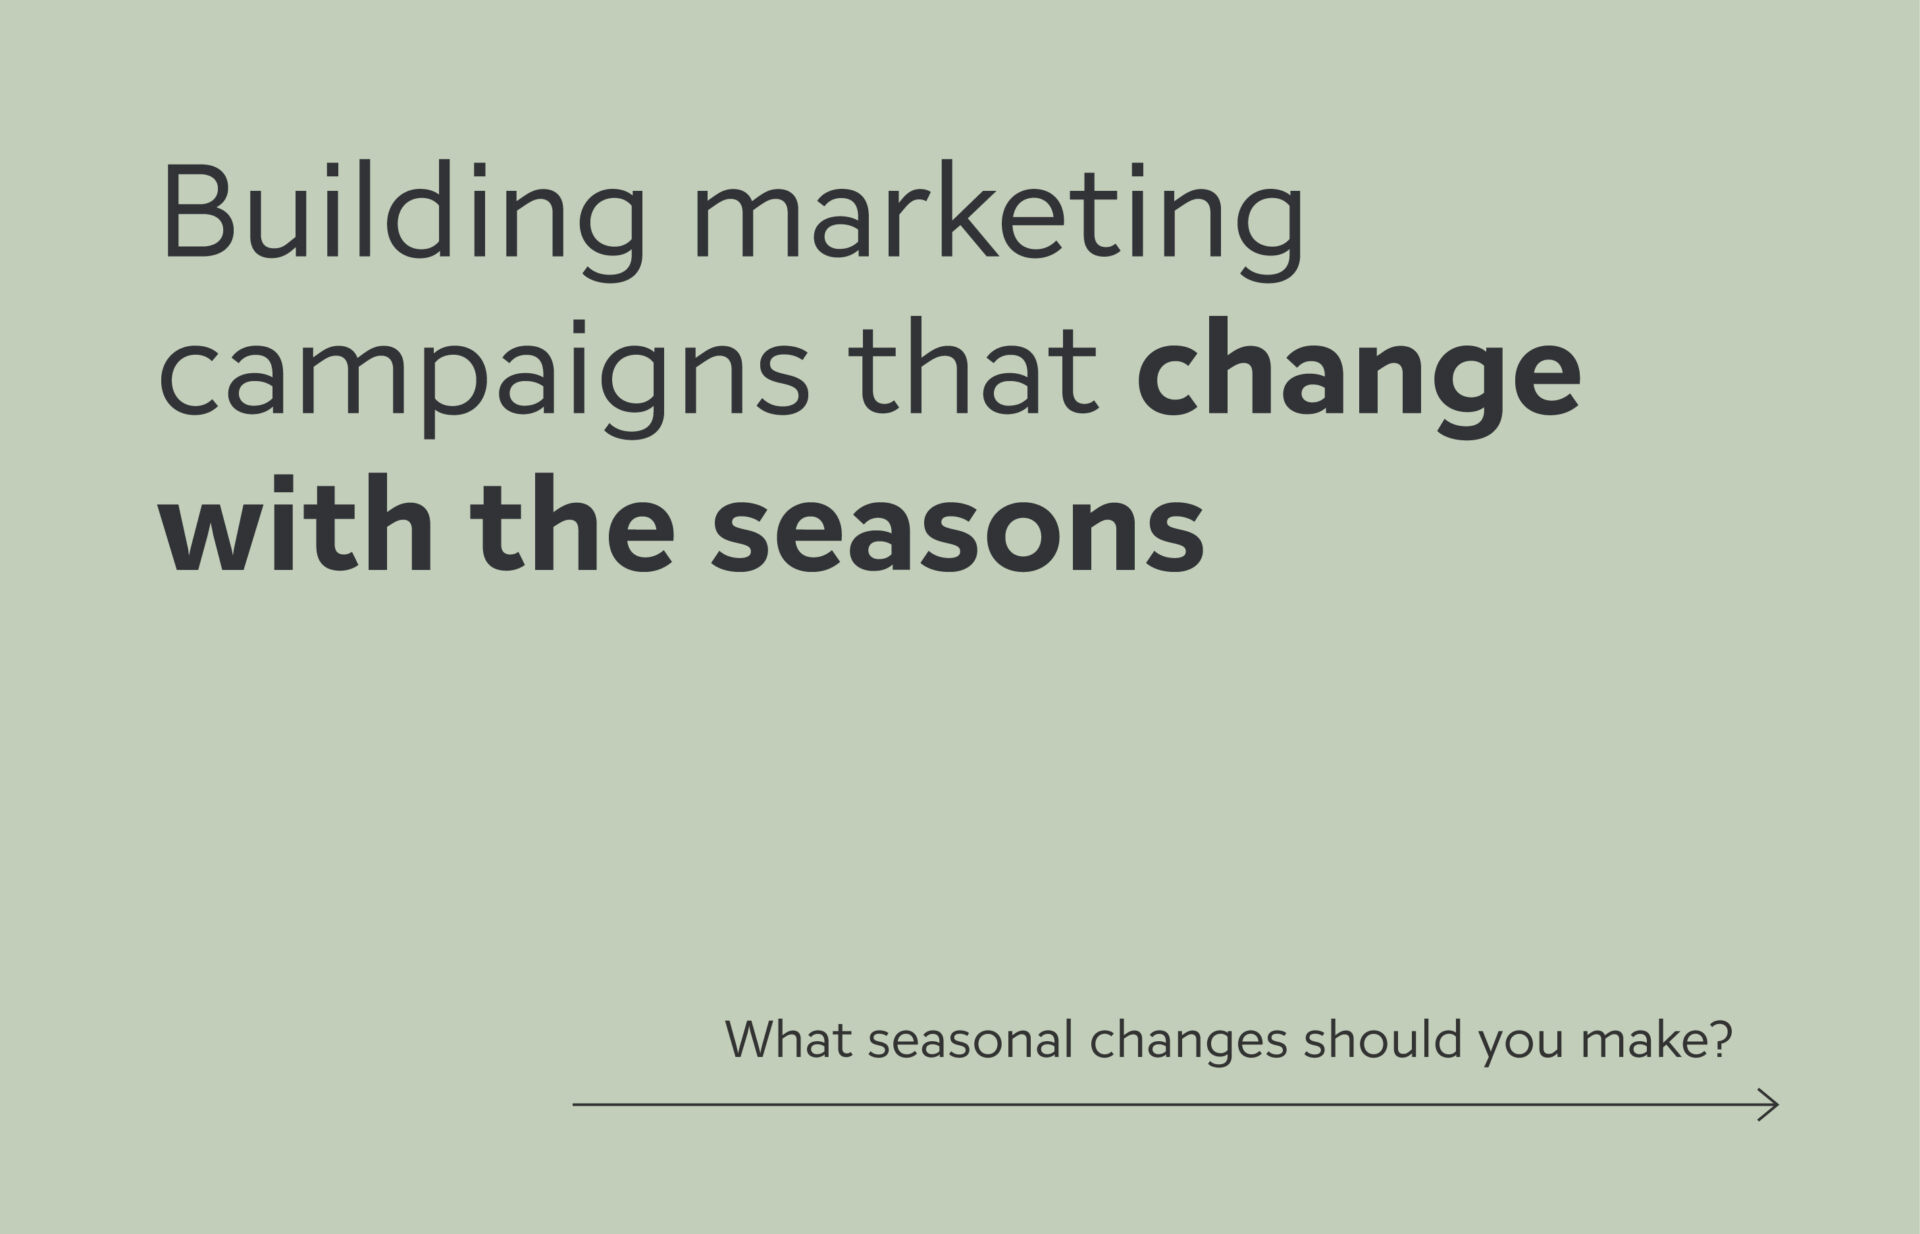 Building marketing campaigns that change with the seasons